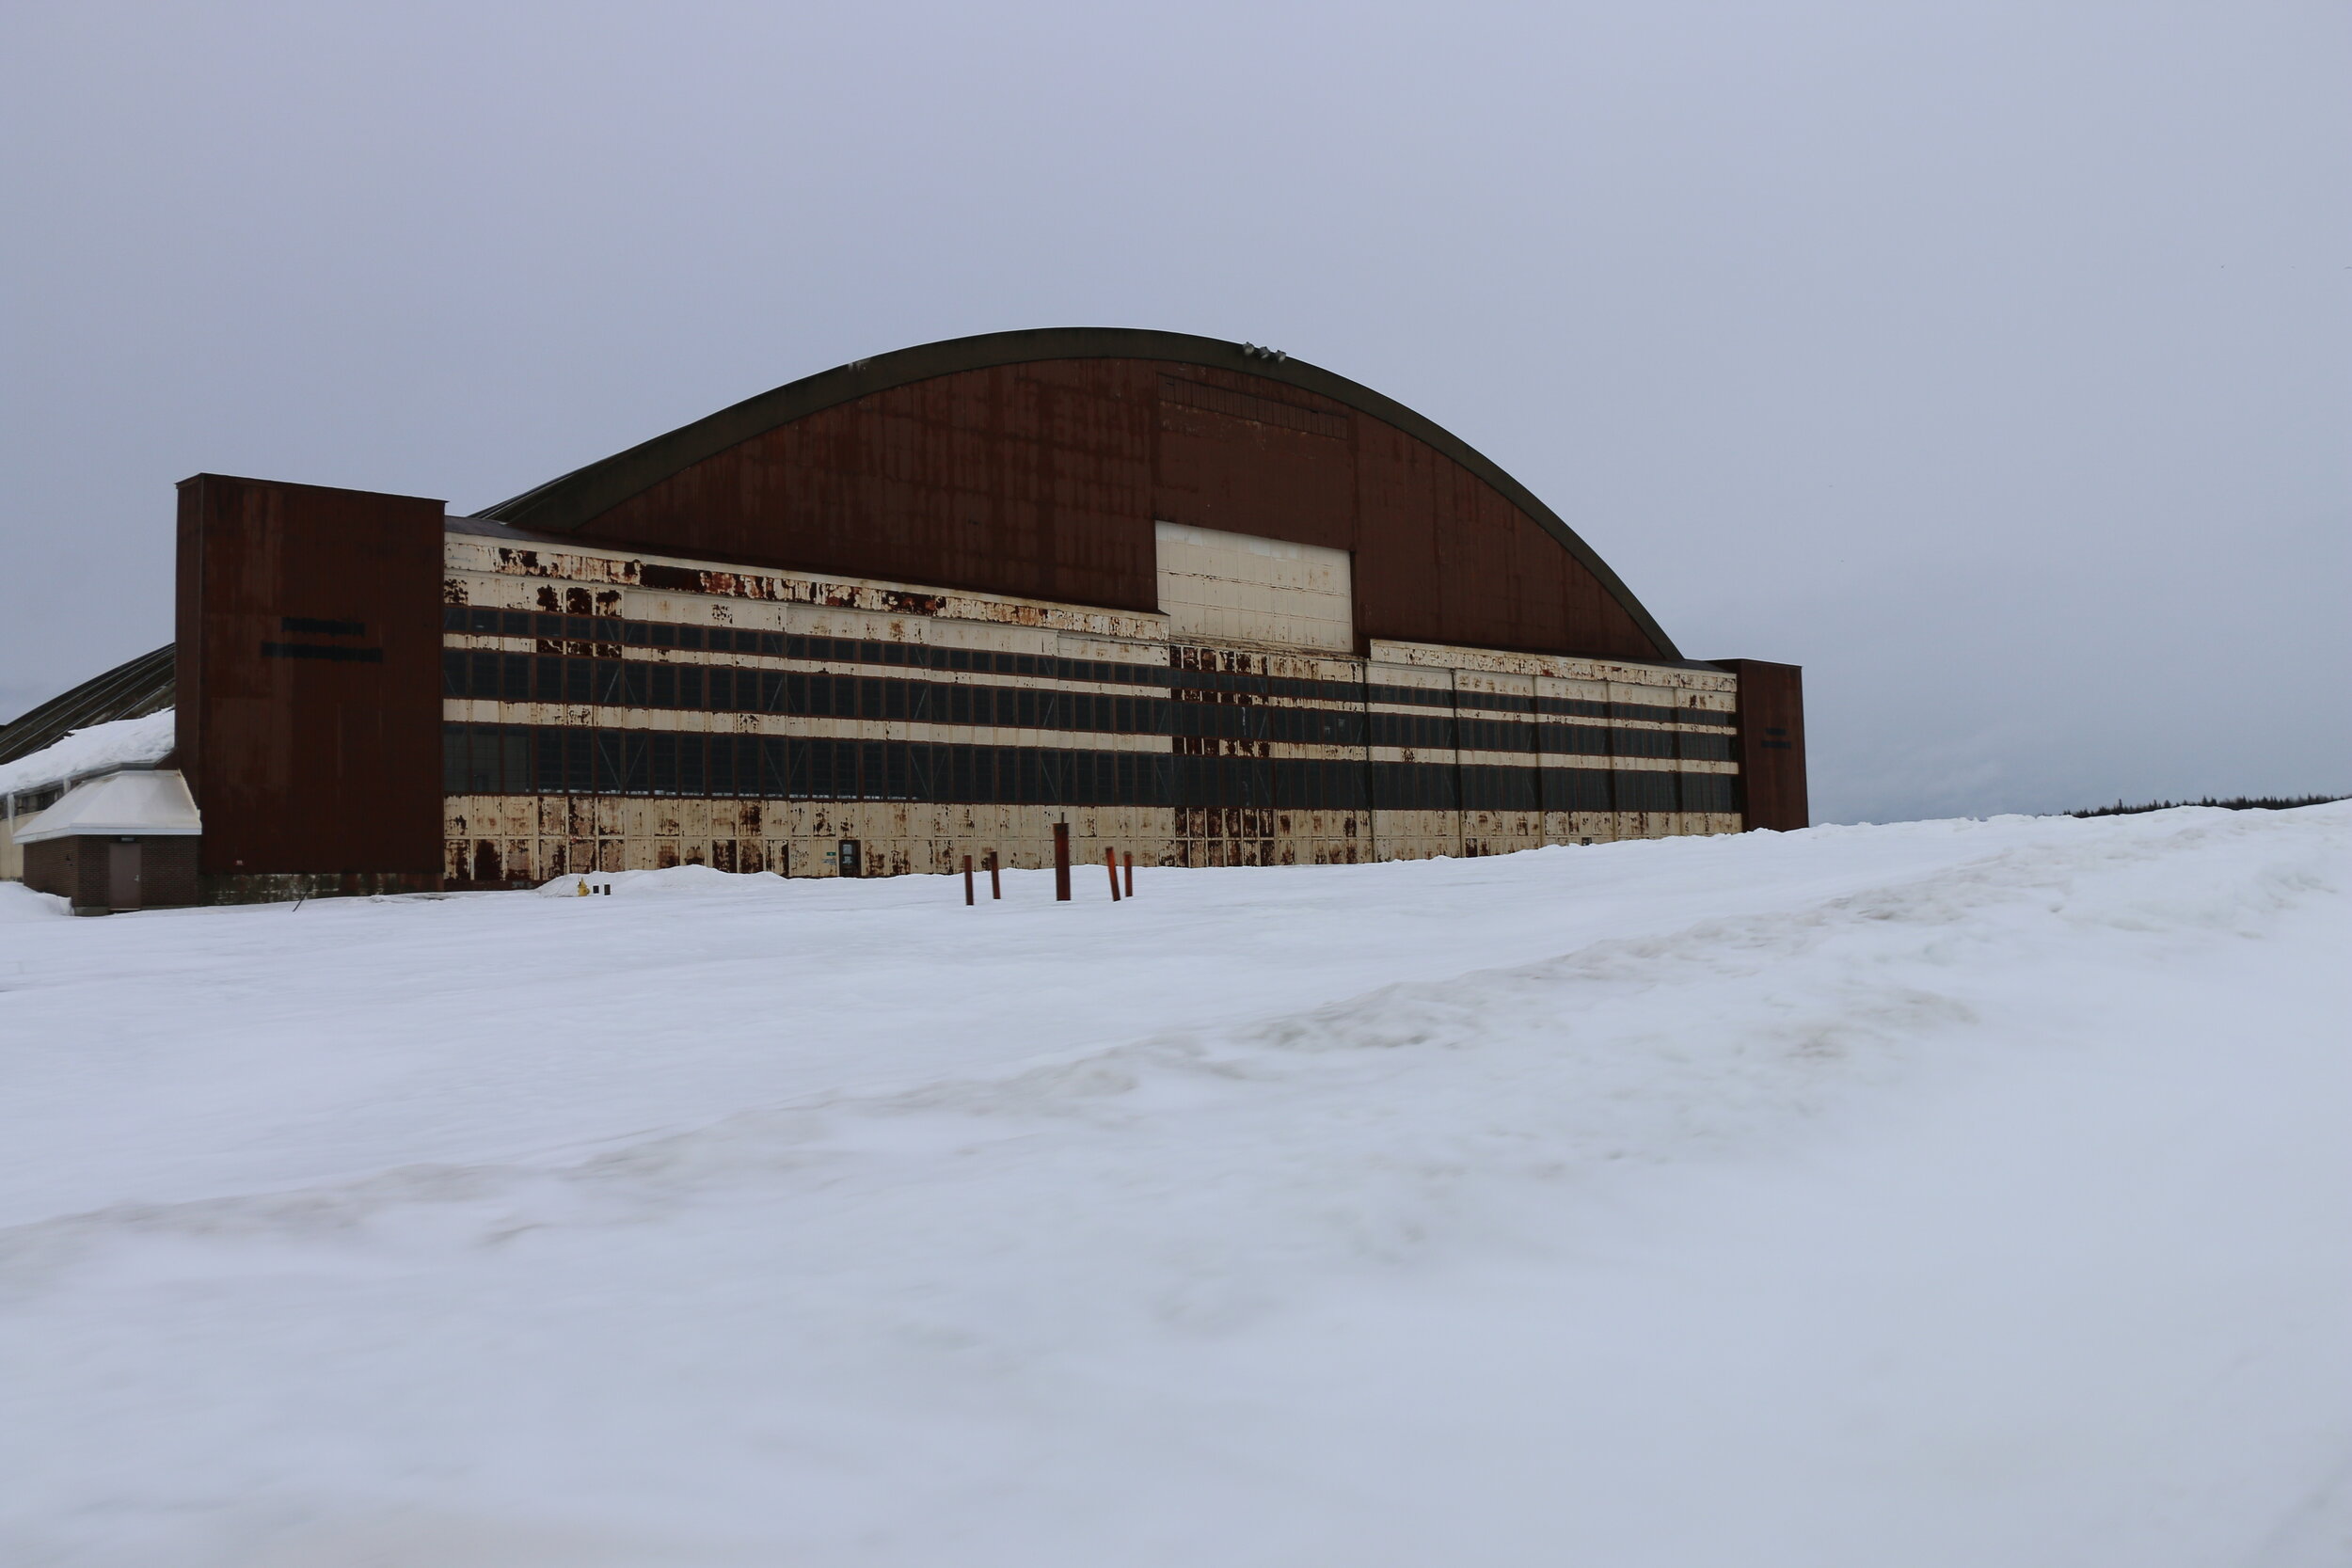   A secondary hanger at Loring.  